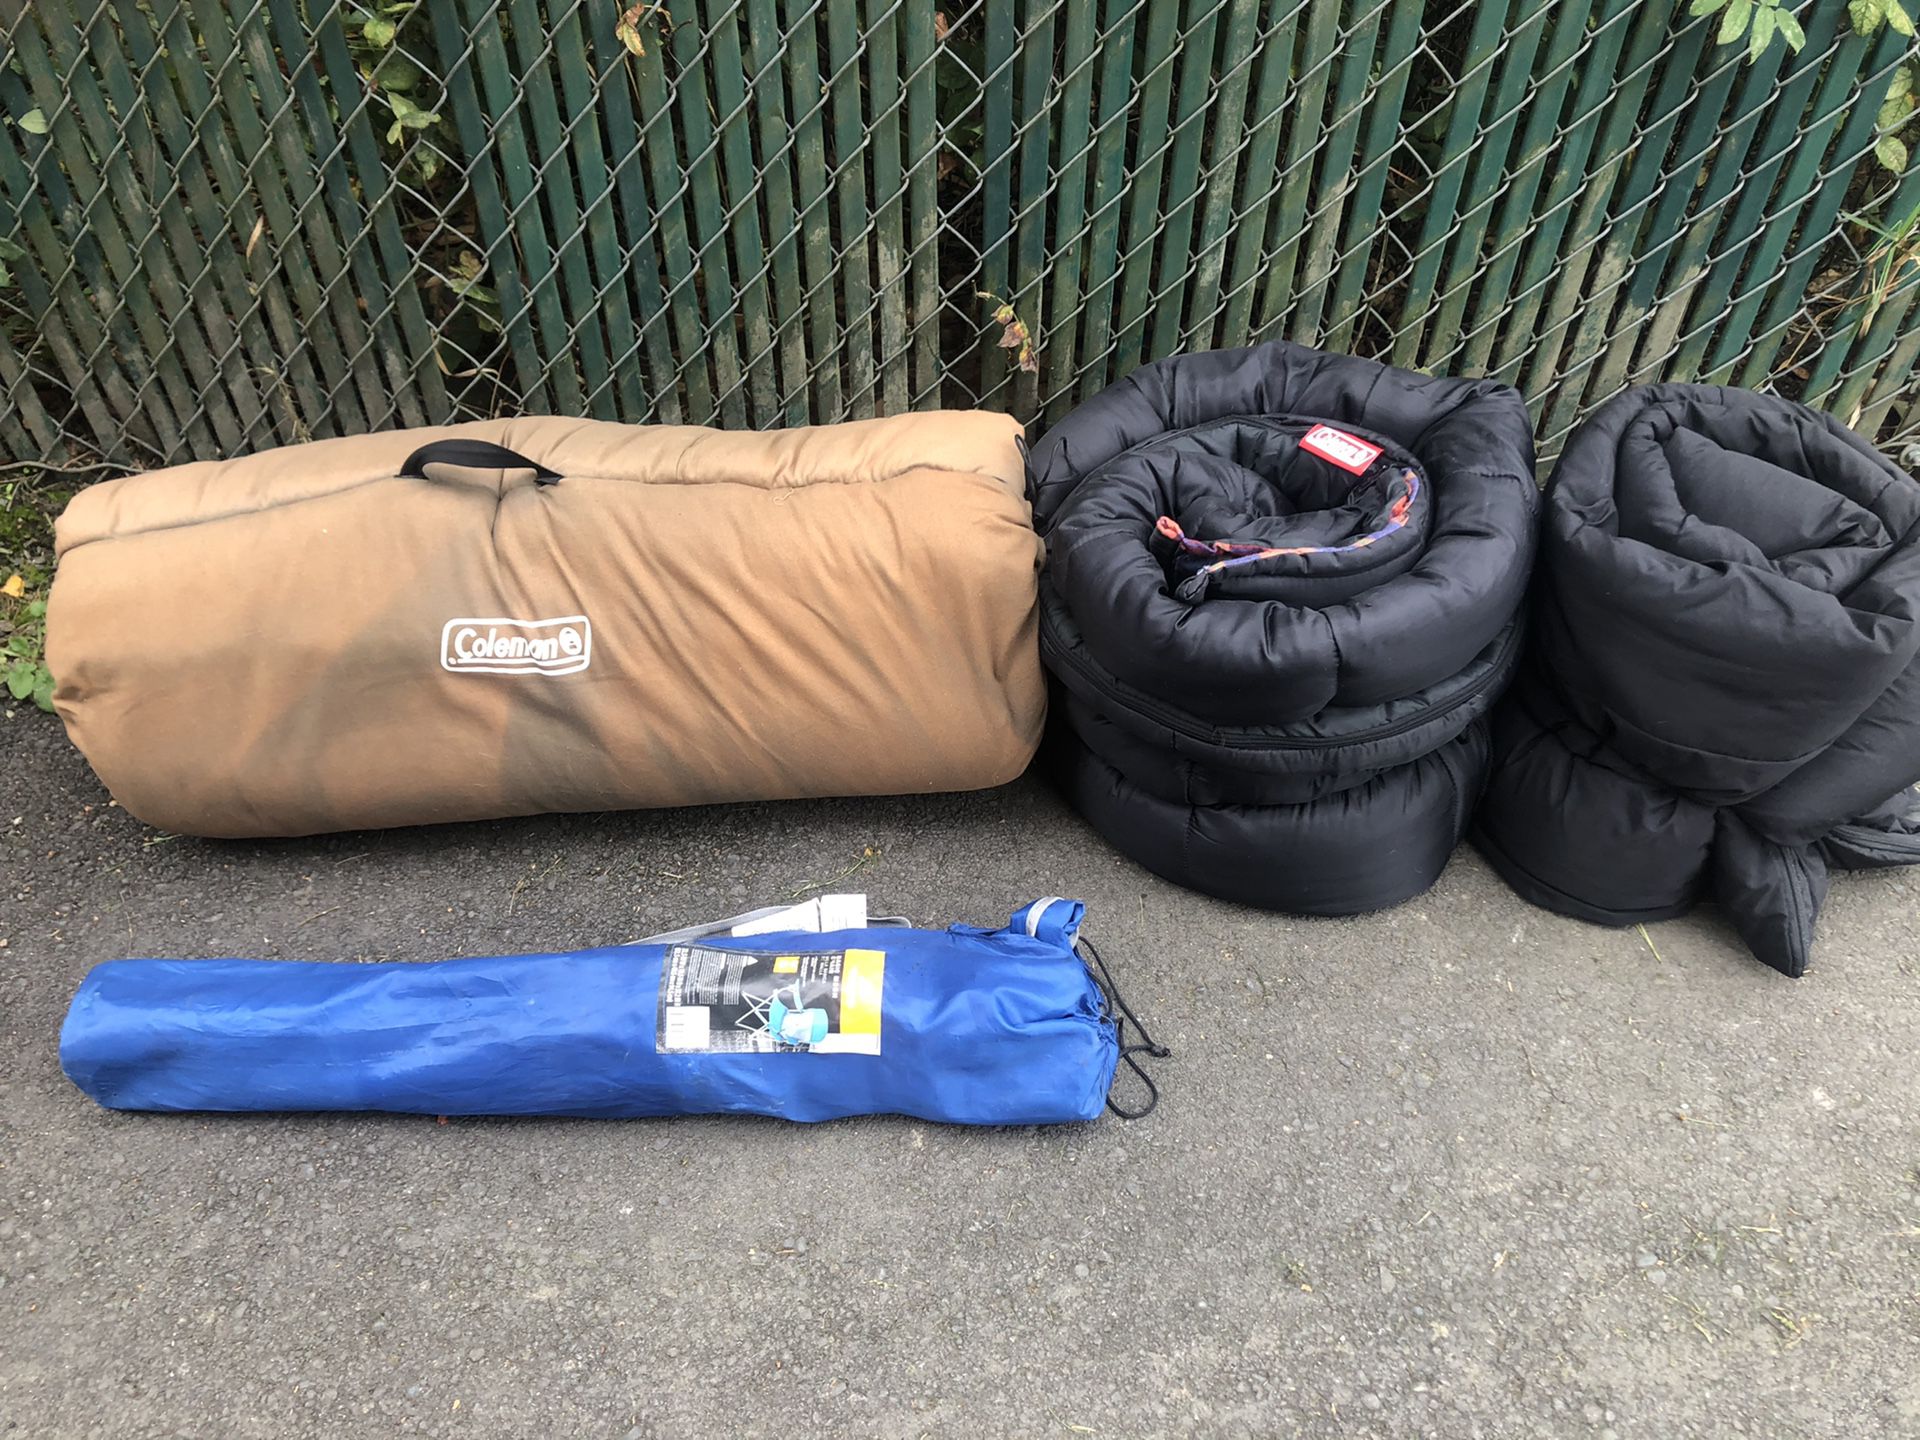 Coleman sleeping bags and more